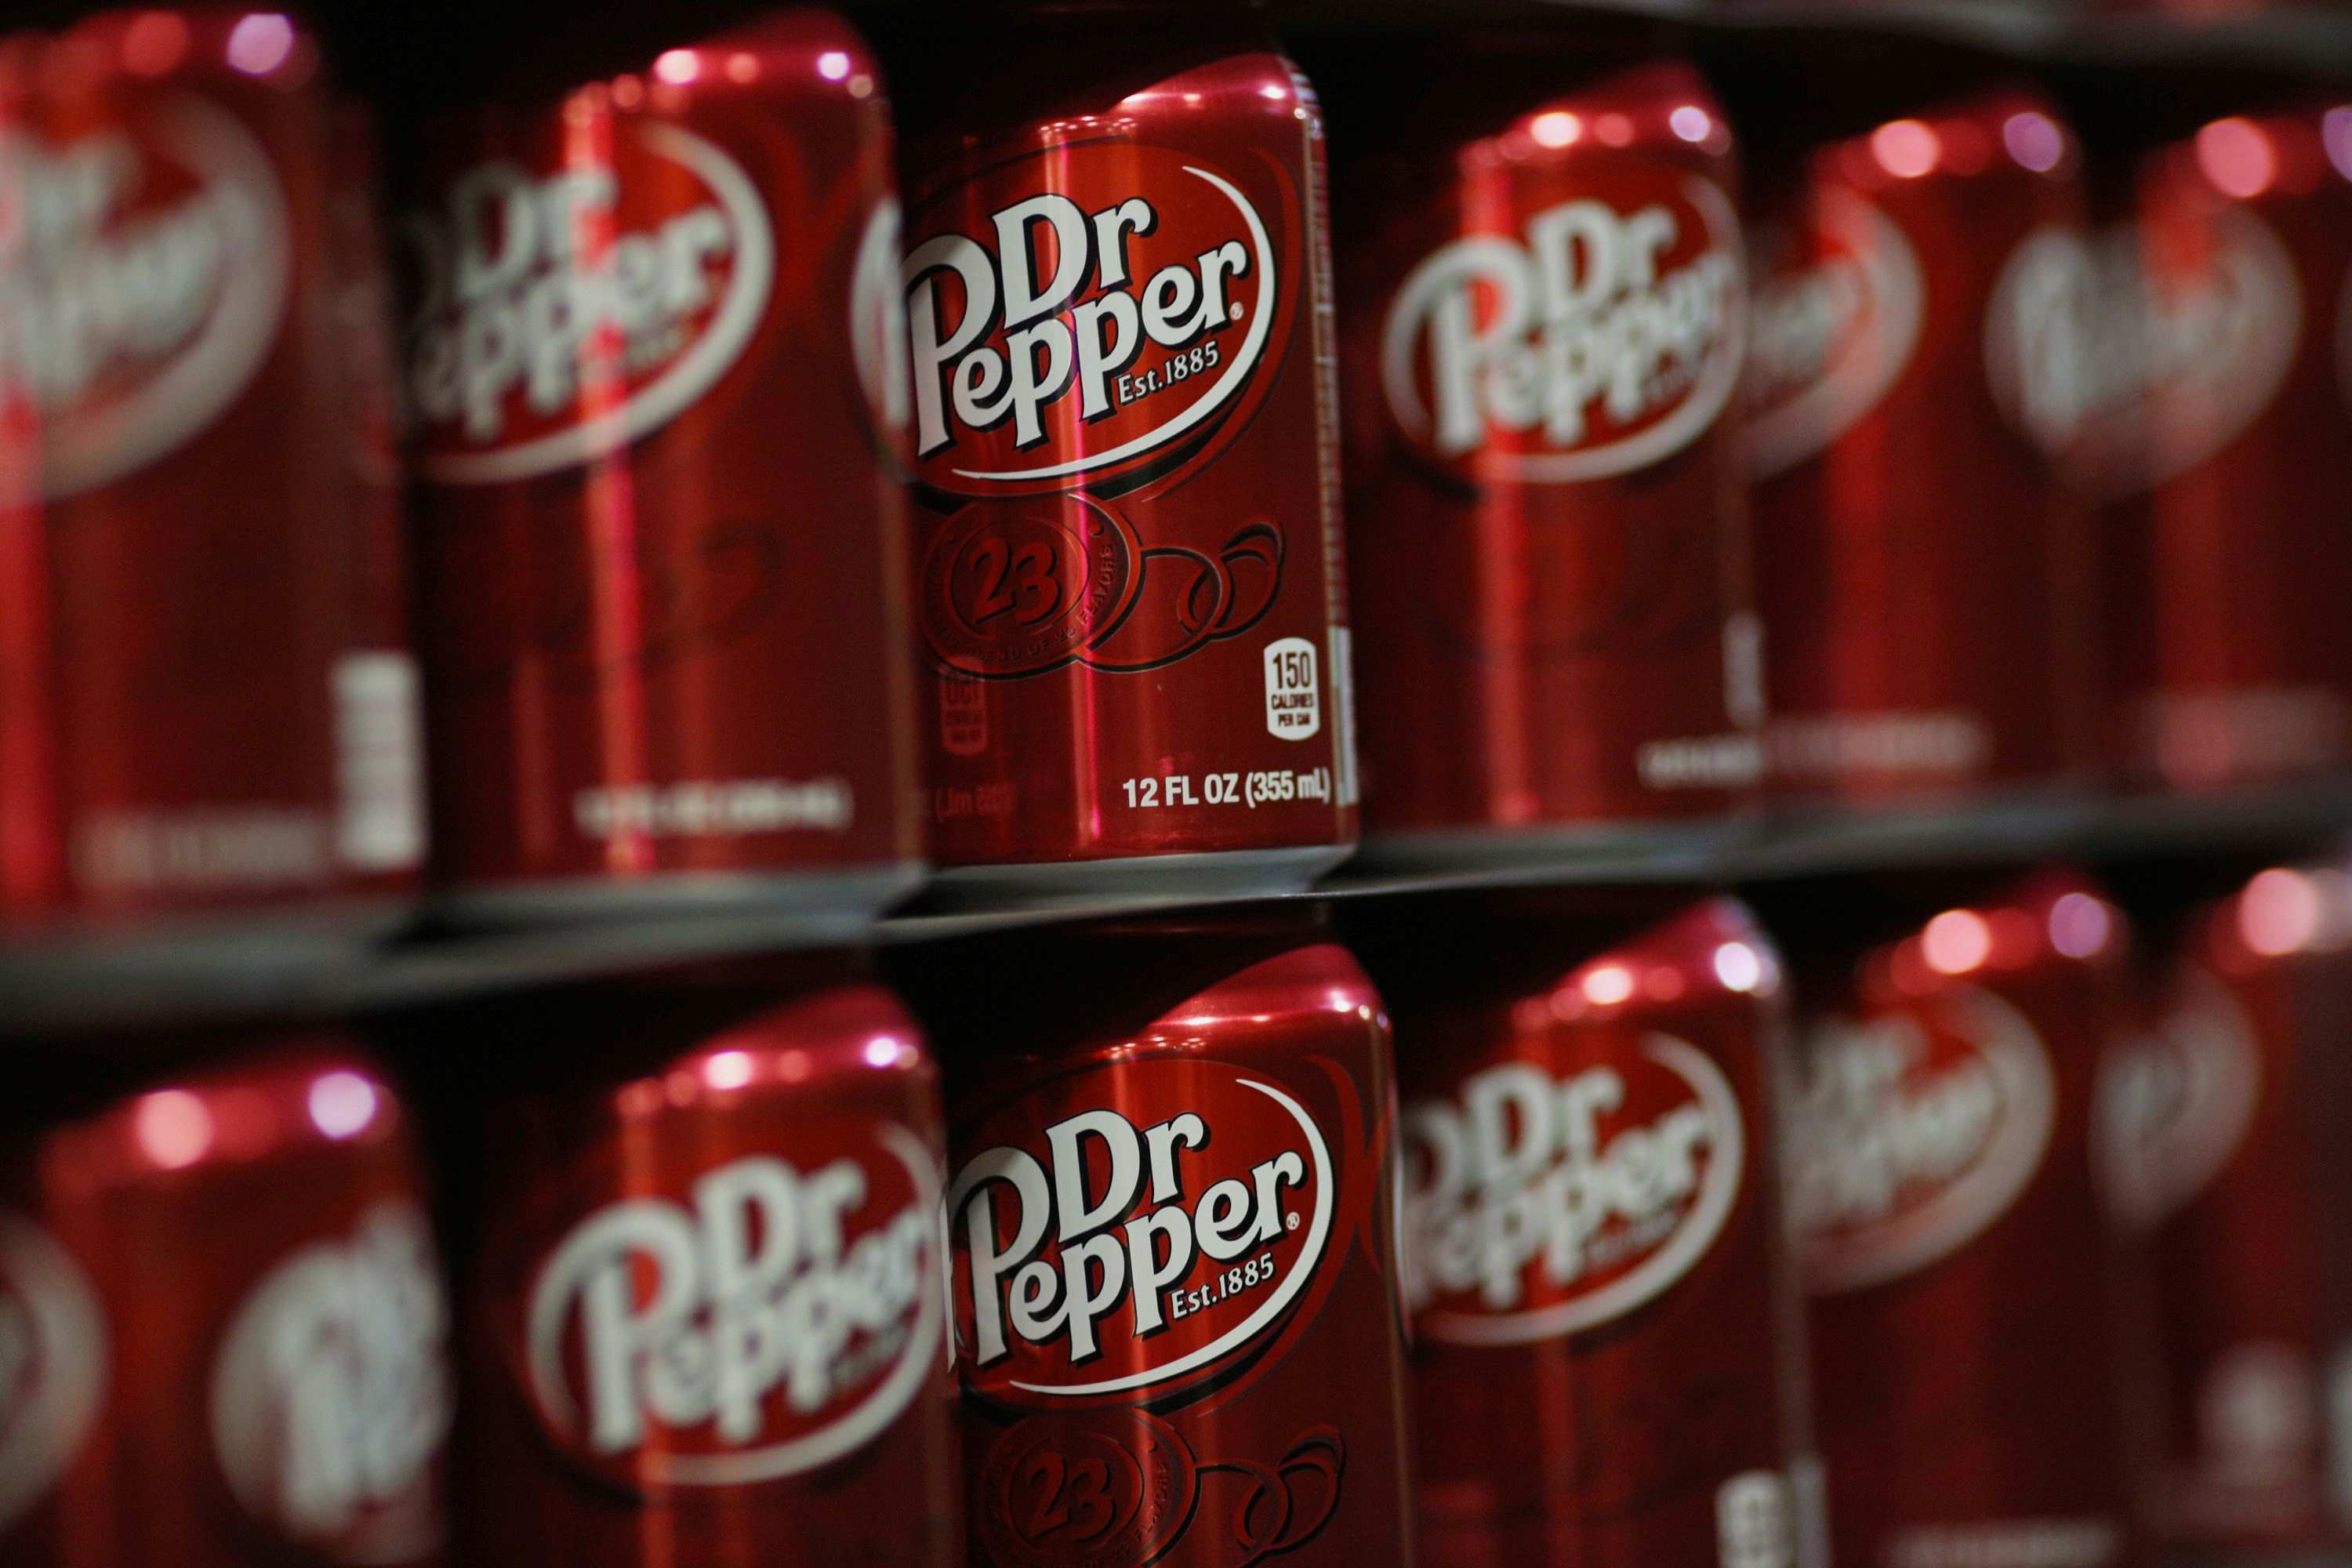 The Shocking Truth: One Can Of Dr Pepper Per Week Vs. One Can Over The Week – Which Is Worse?